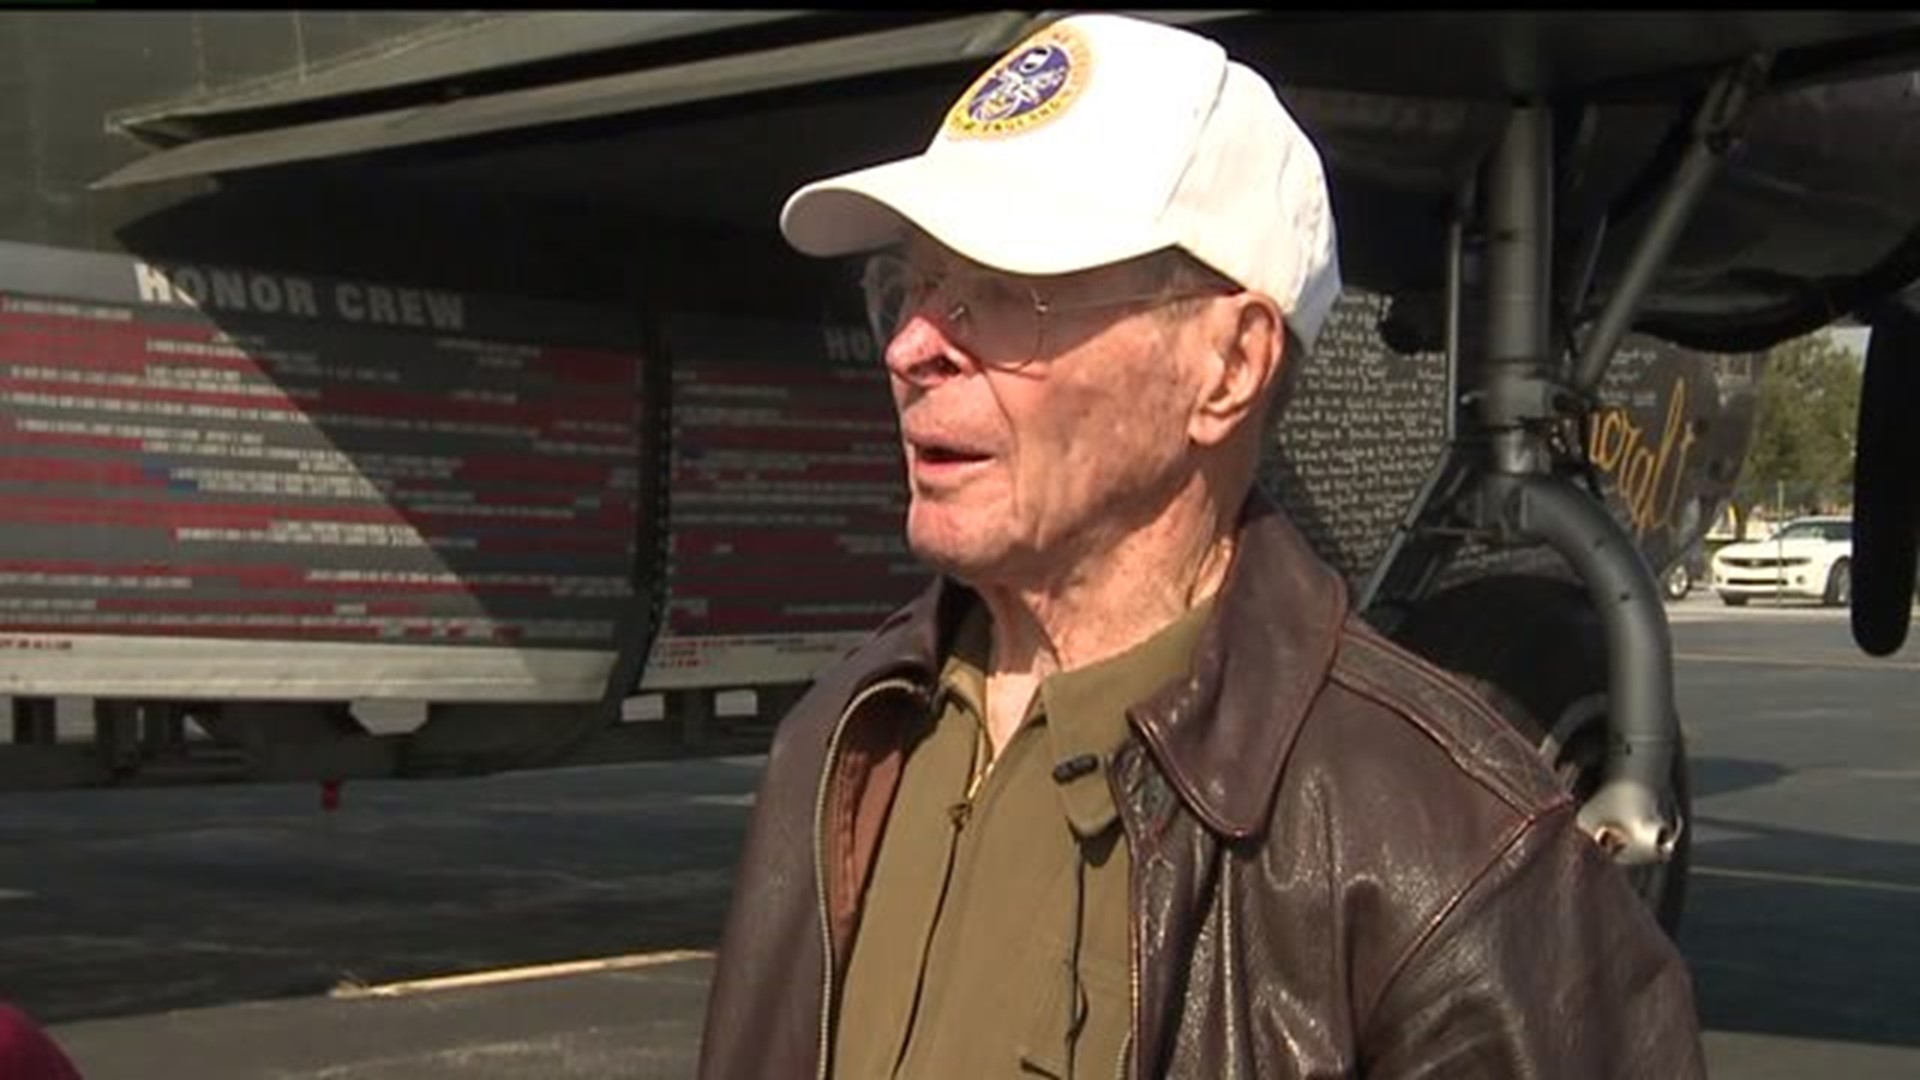 Cumberland County 94-year-old WWII vet returns to skies in B-24 Bomber